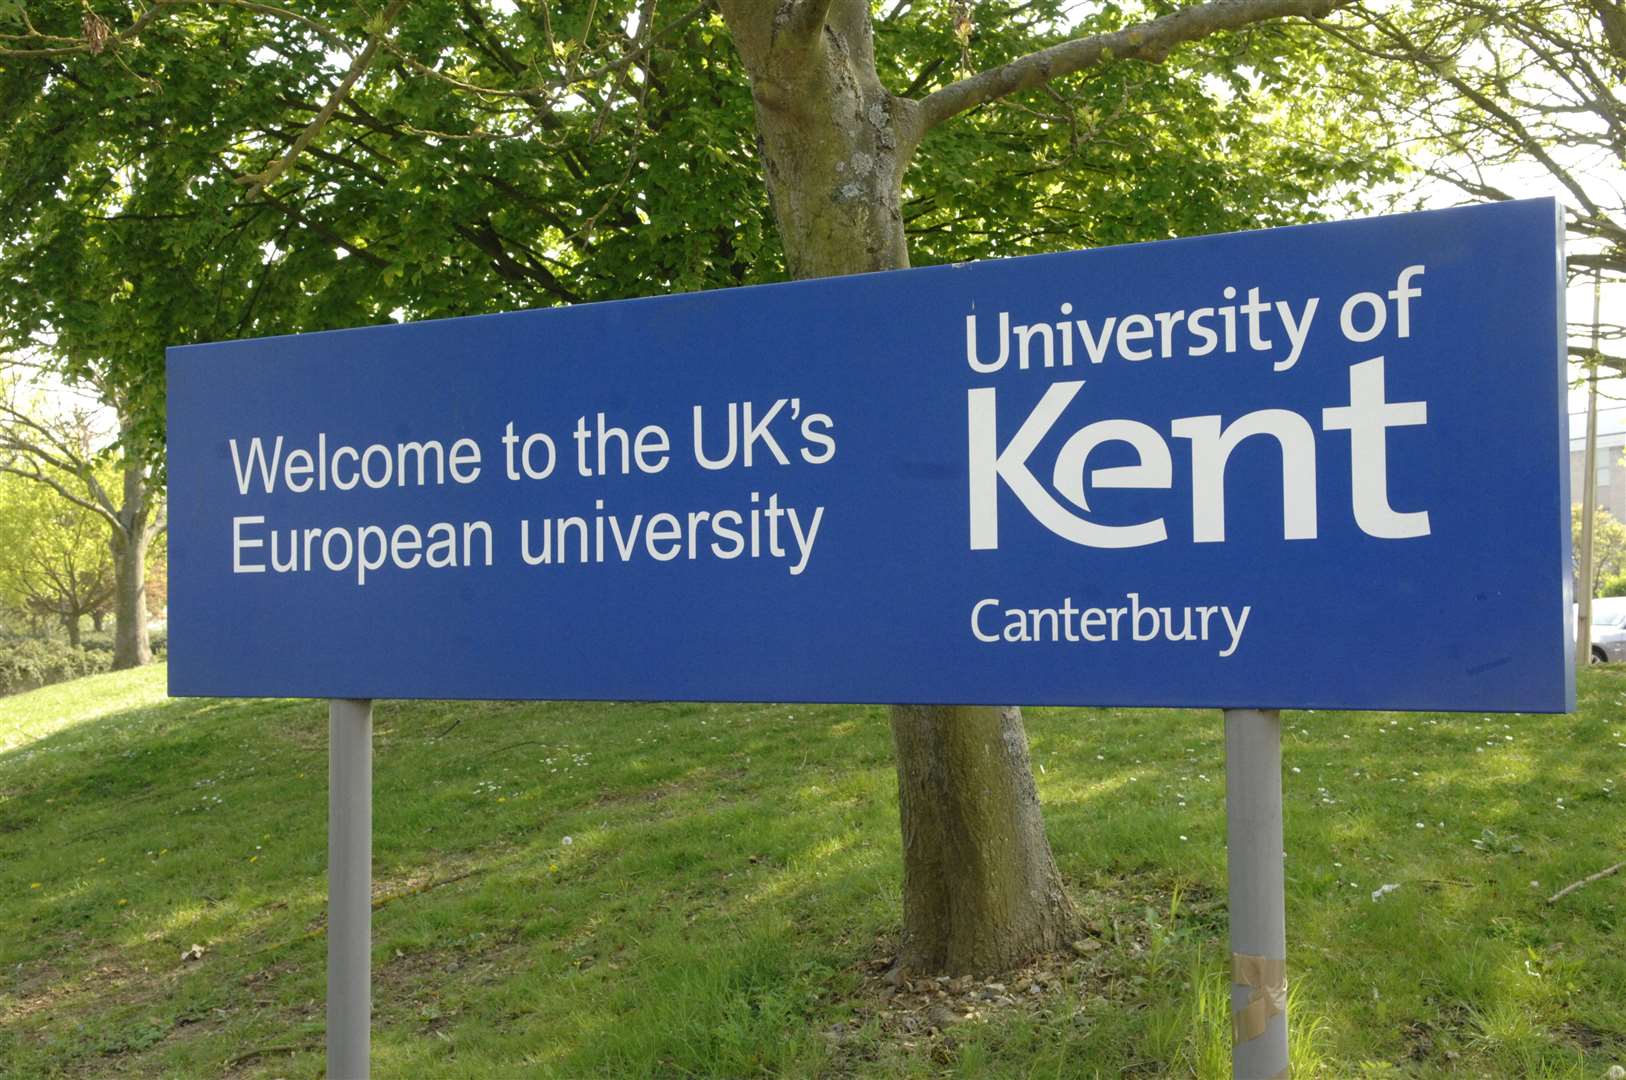 Researchers from the University of Kent at Canterbury are helping colleagues at Oxford collect evidence